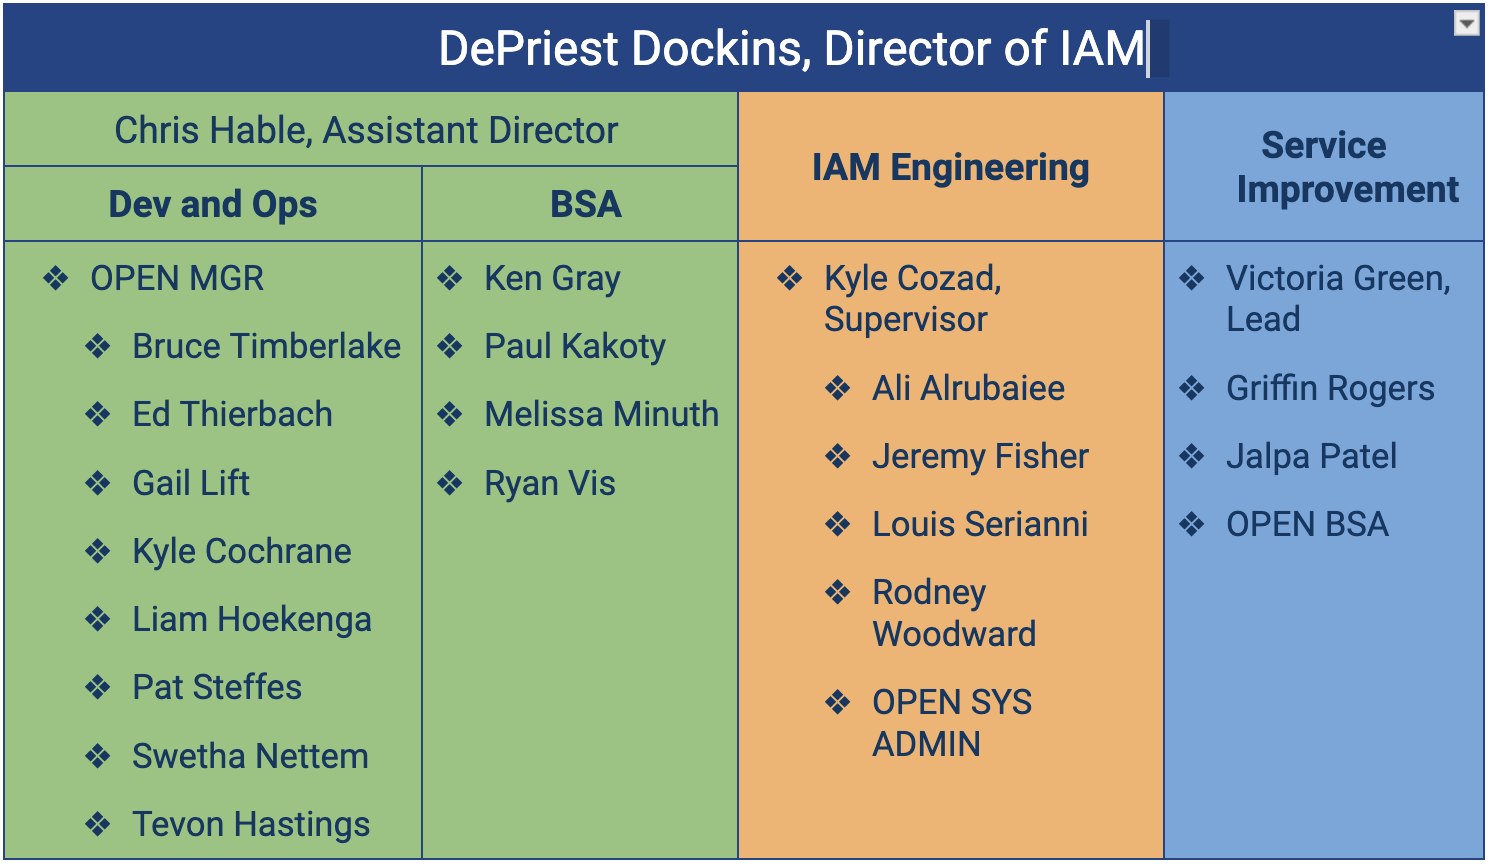 Org chart for ITS IAM structure adjustment with DePriest Dockins as Director and Chris Hable as Assistant Director.